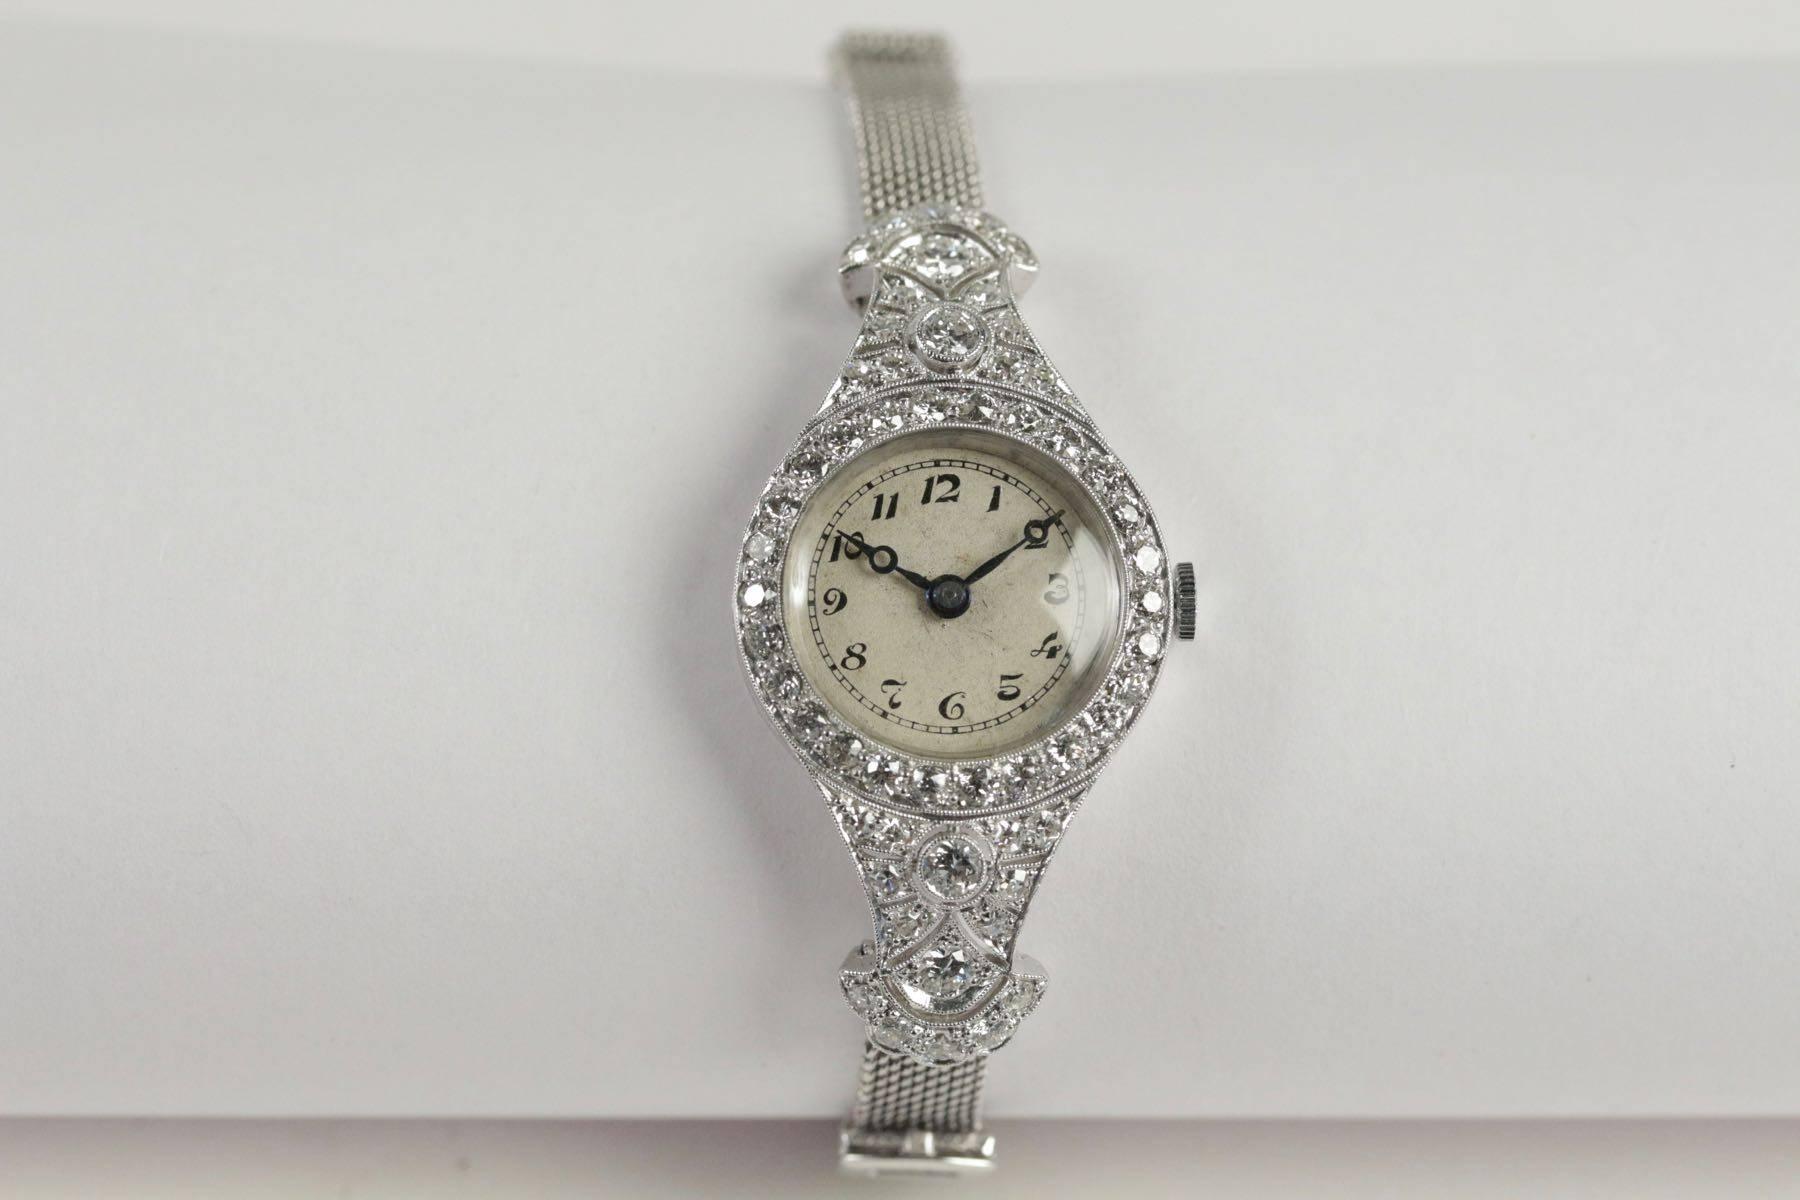 Art Deco ladies watch mounted in platinum, set with brillant cut diamonds (approximately 3.50 ct). Ivory colored dial with black Arabic numerals. 18k White gold rope bracelet. Manual winding.